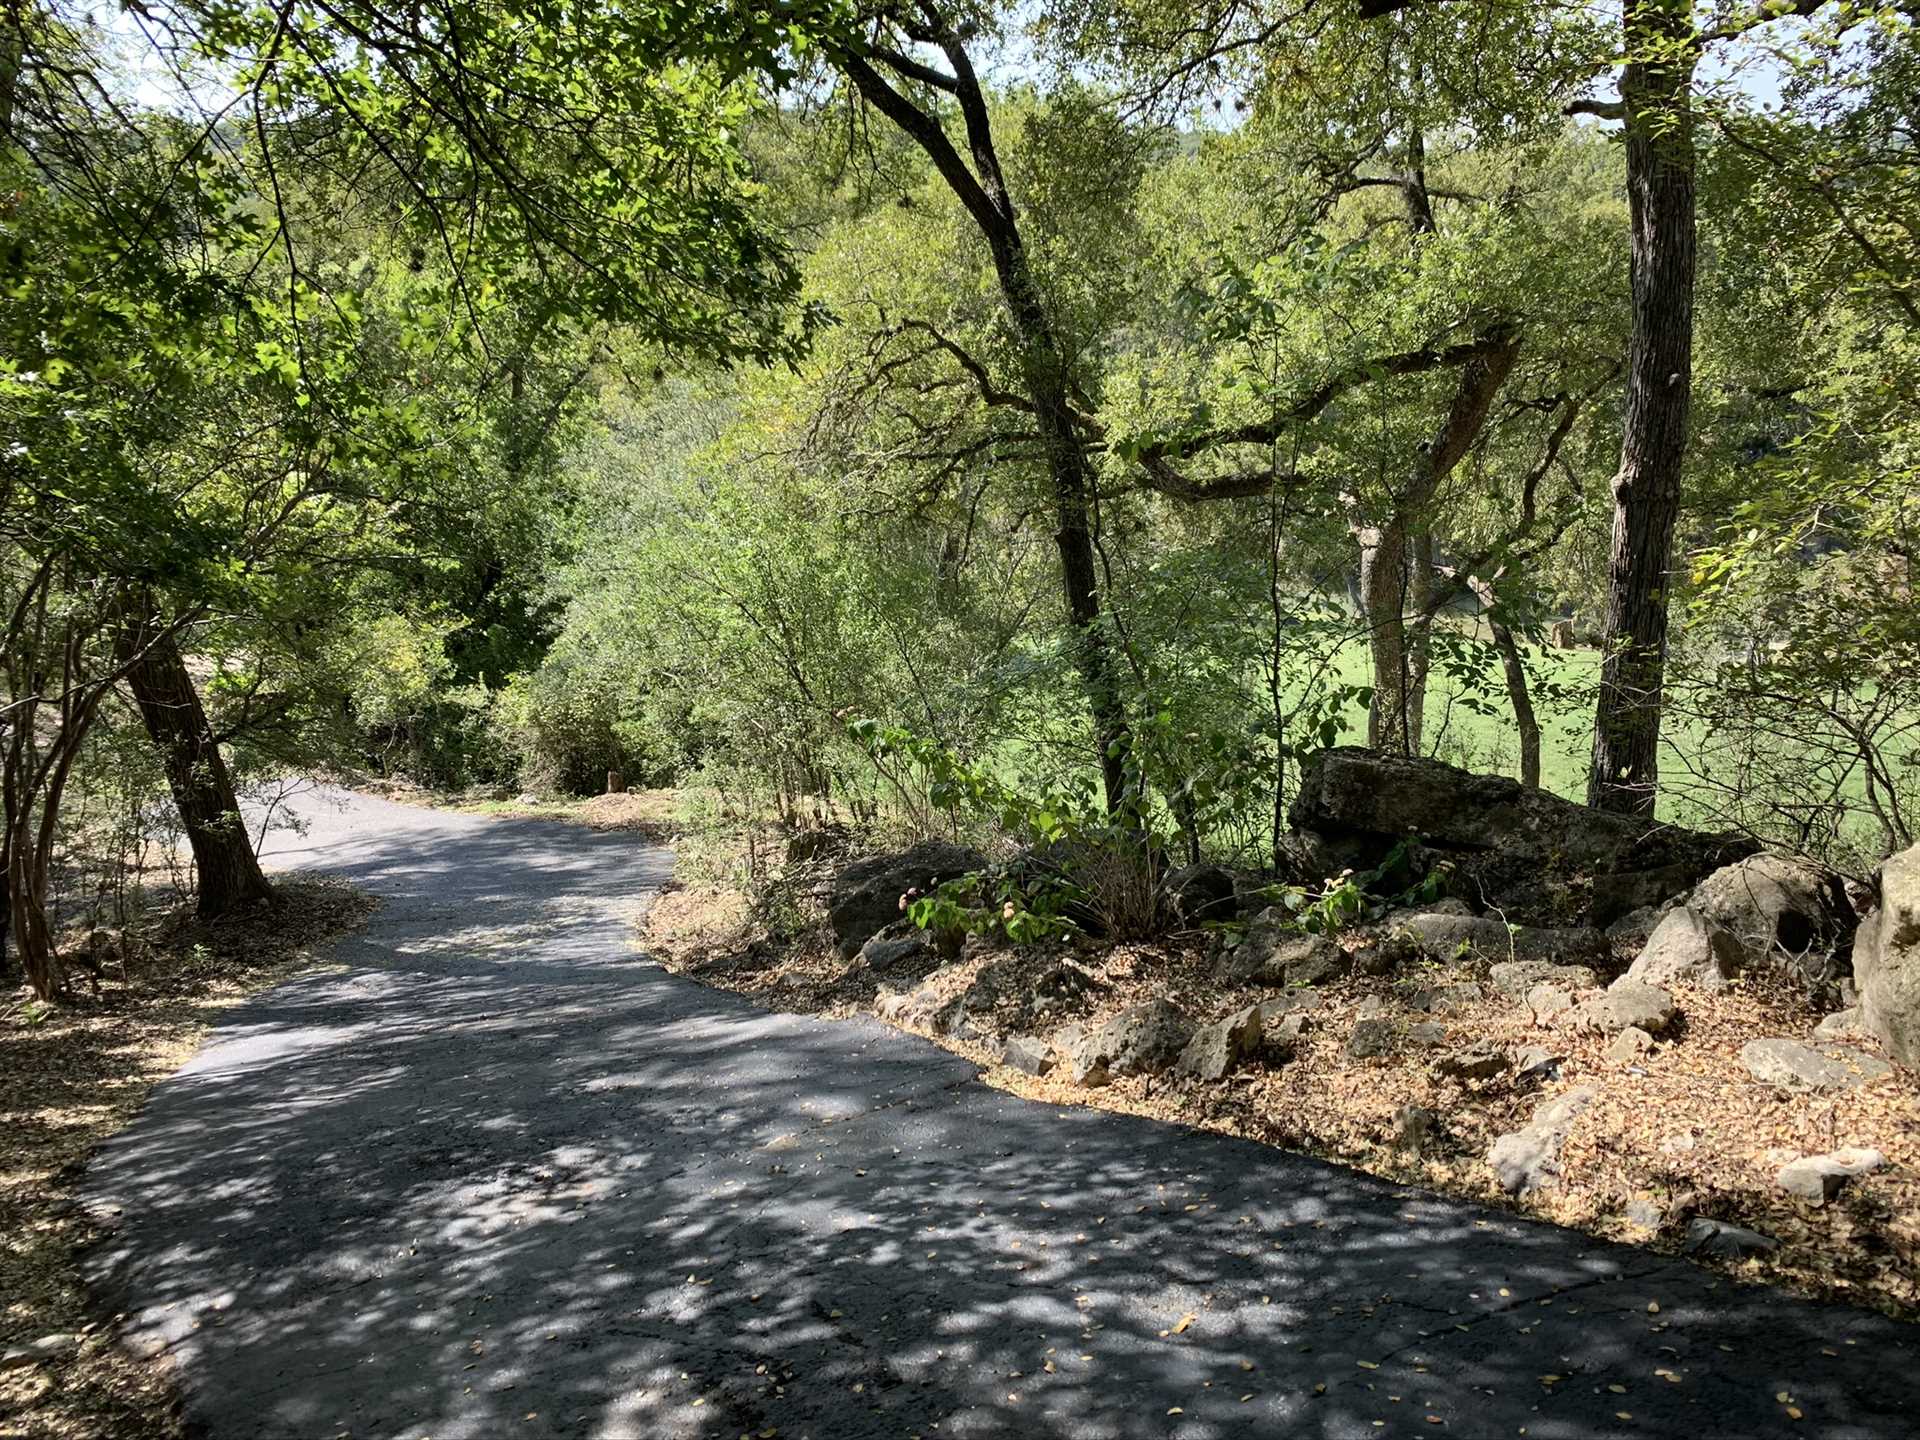                                                 Please contact us for more information about the private access road that leads from the Retreat to the Guadalupe.